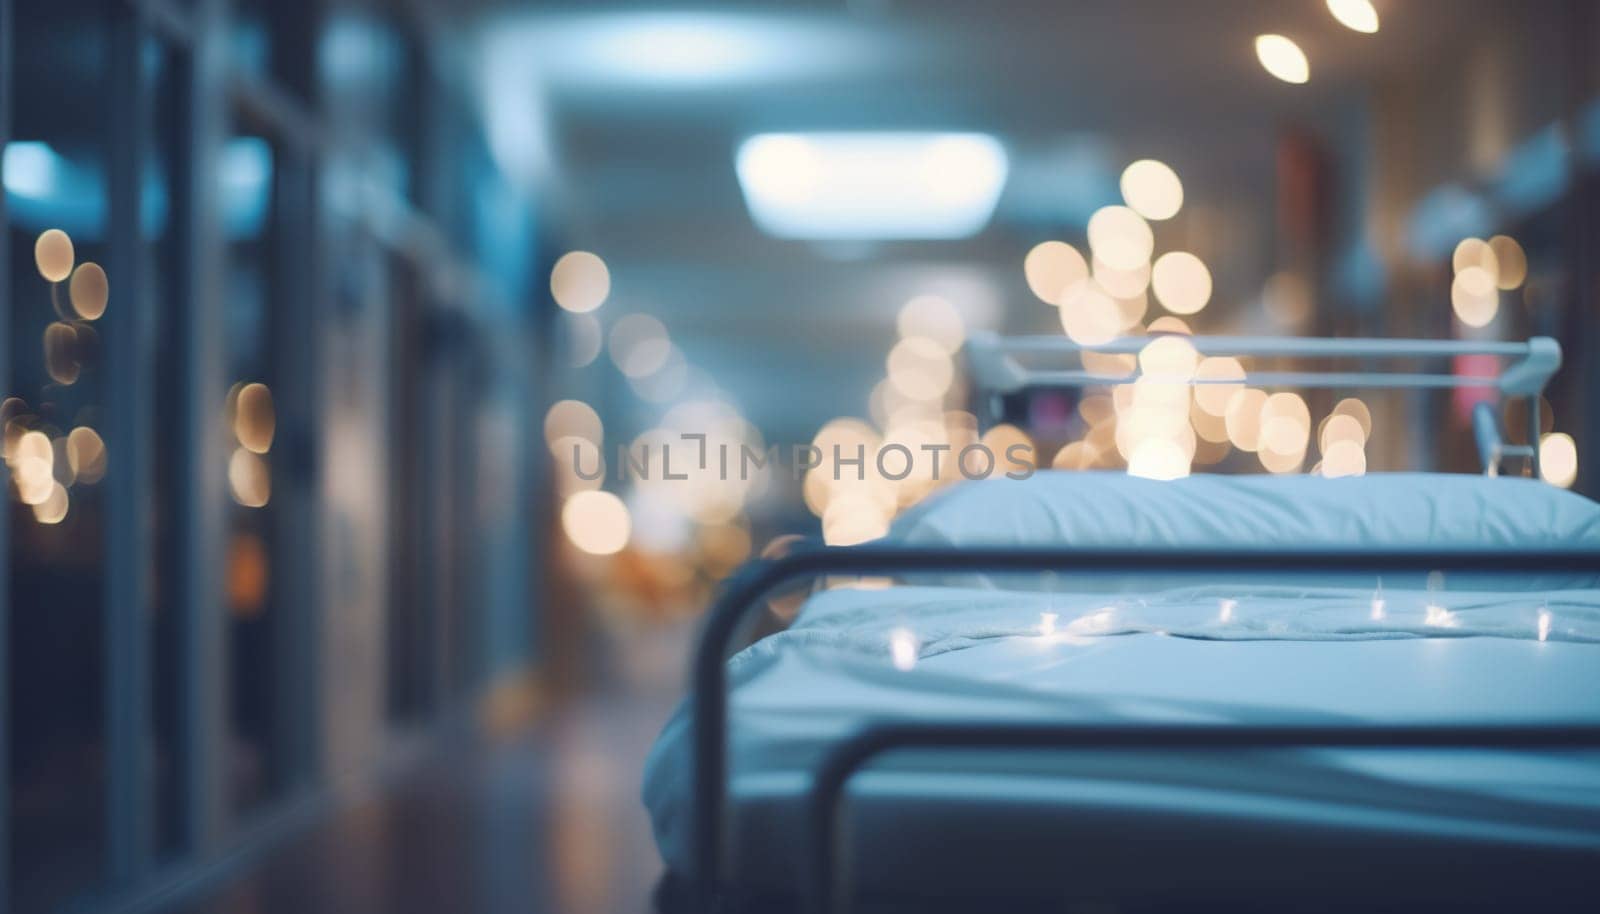 Hospital - abstract background by Nadtochiy